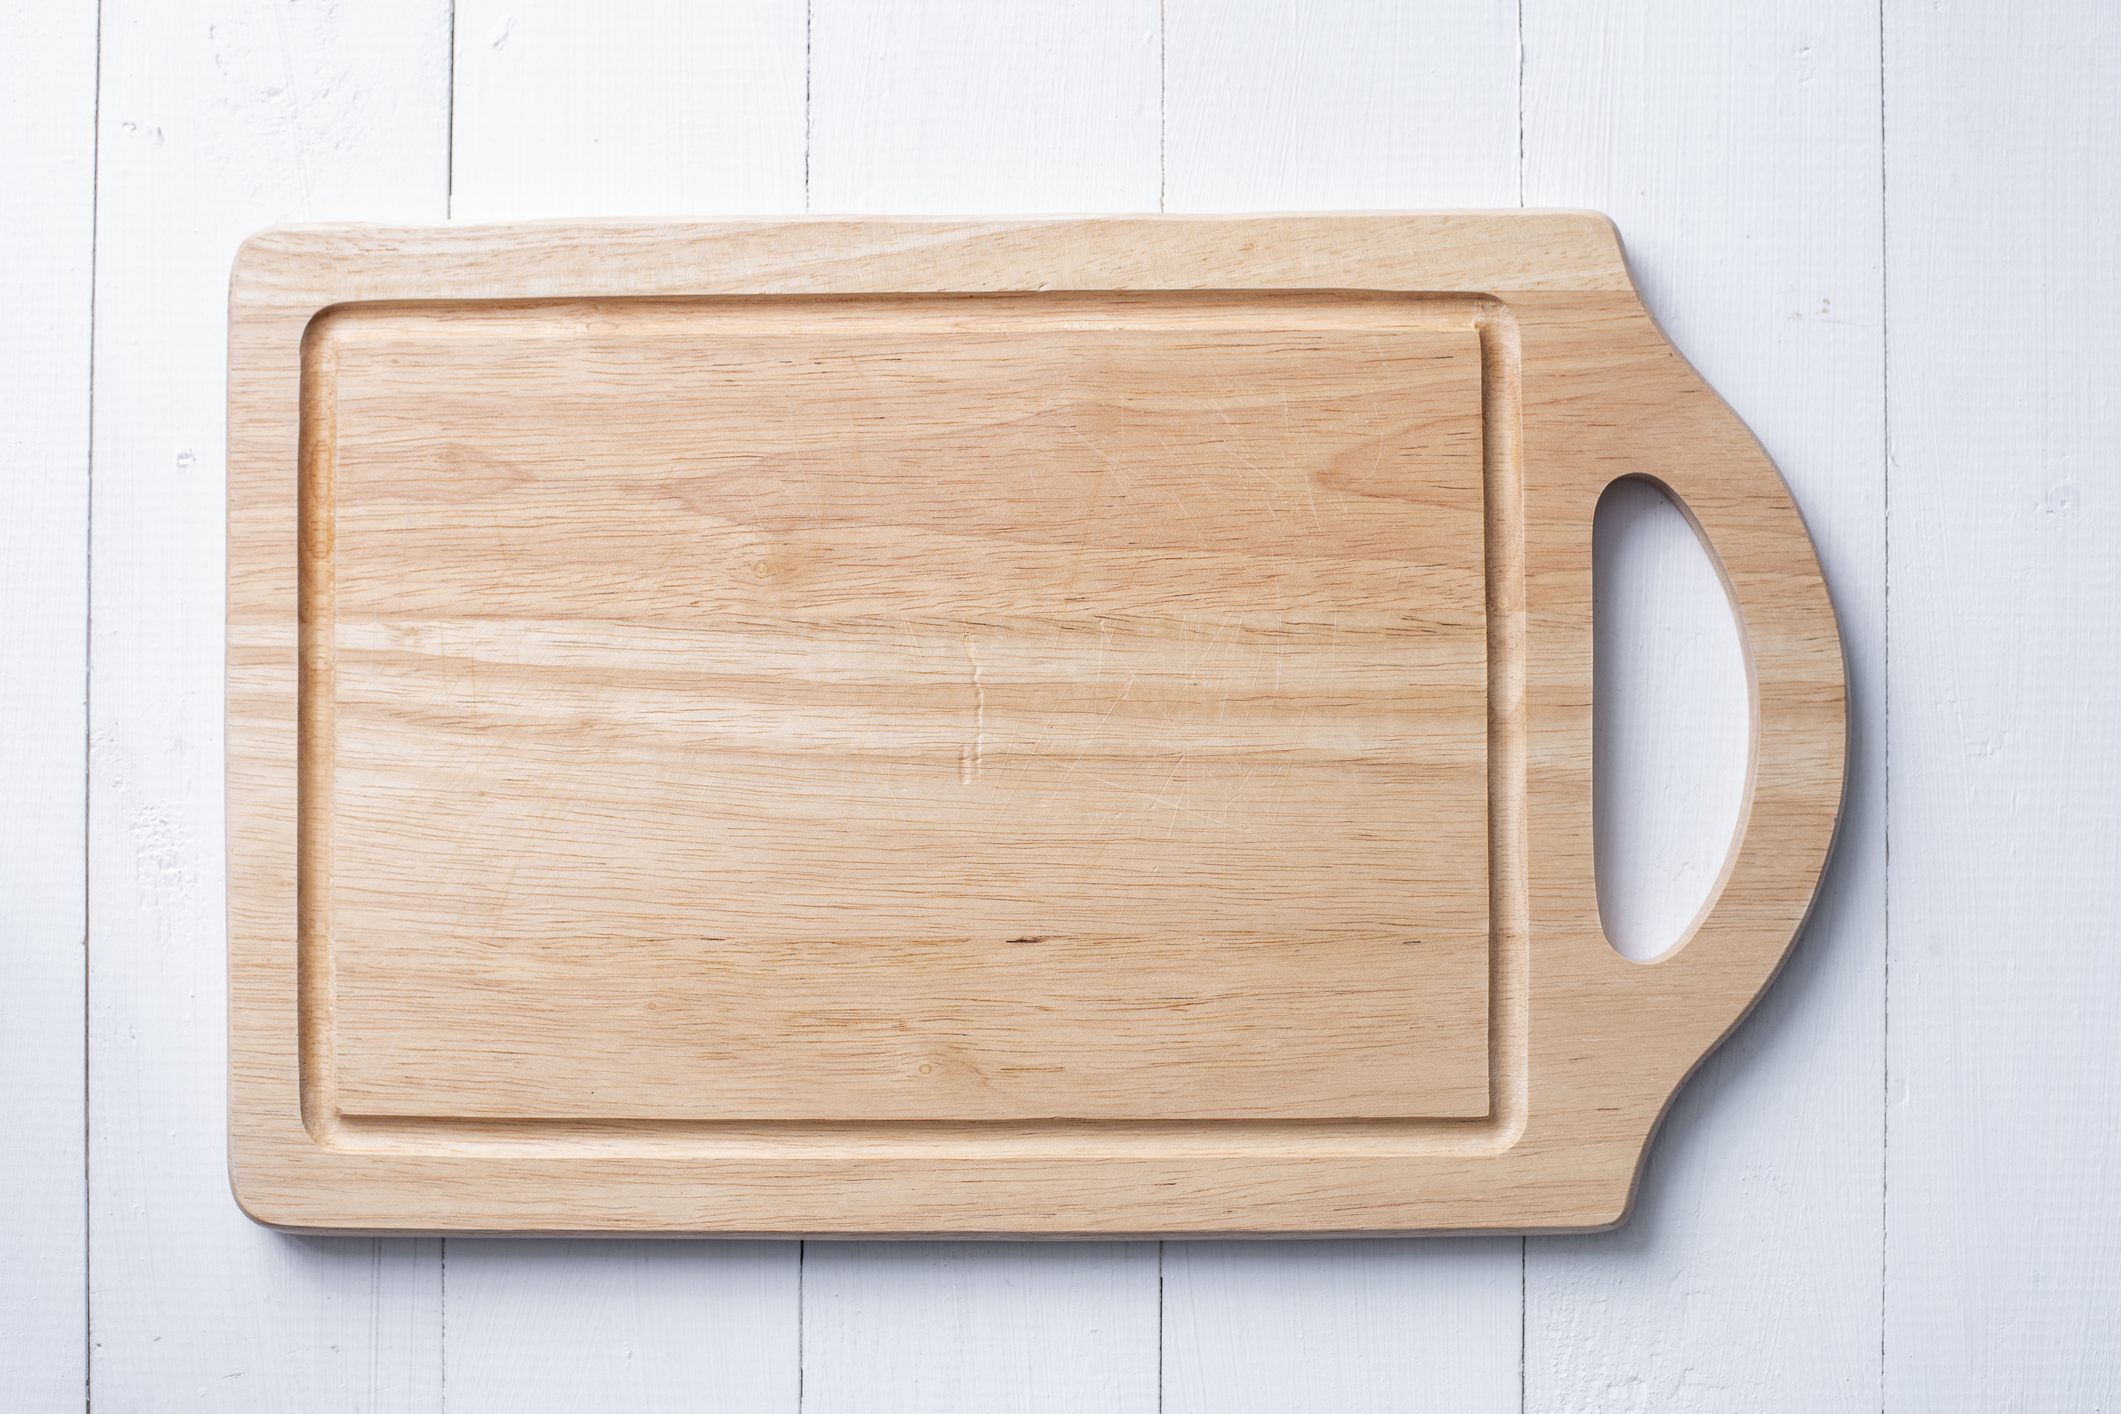 How to Clean a Wooden Cutting Board—and Sanitize It Too!